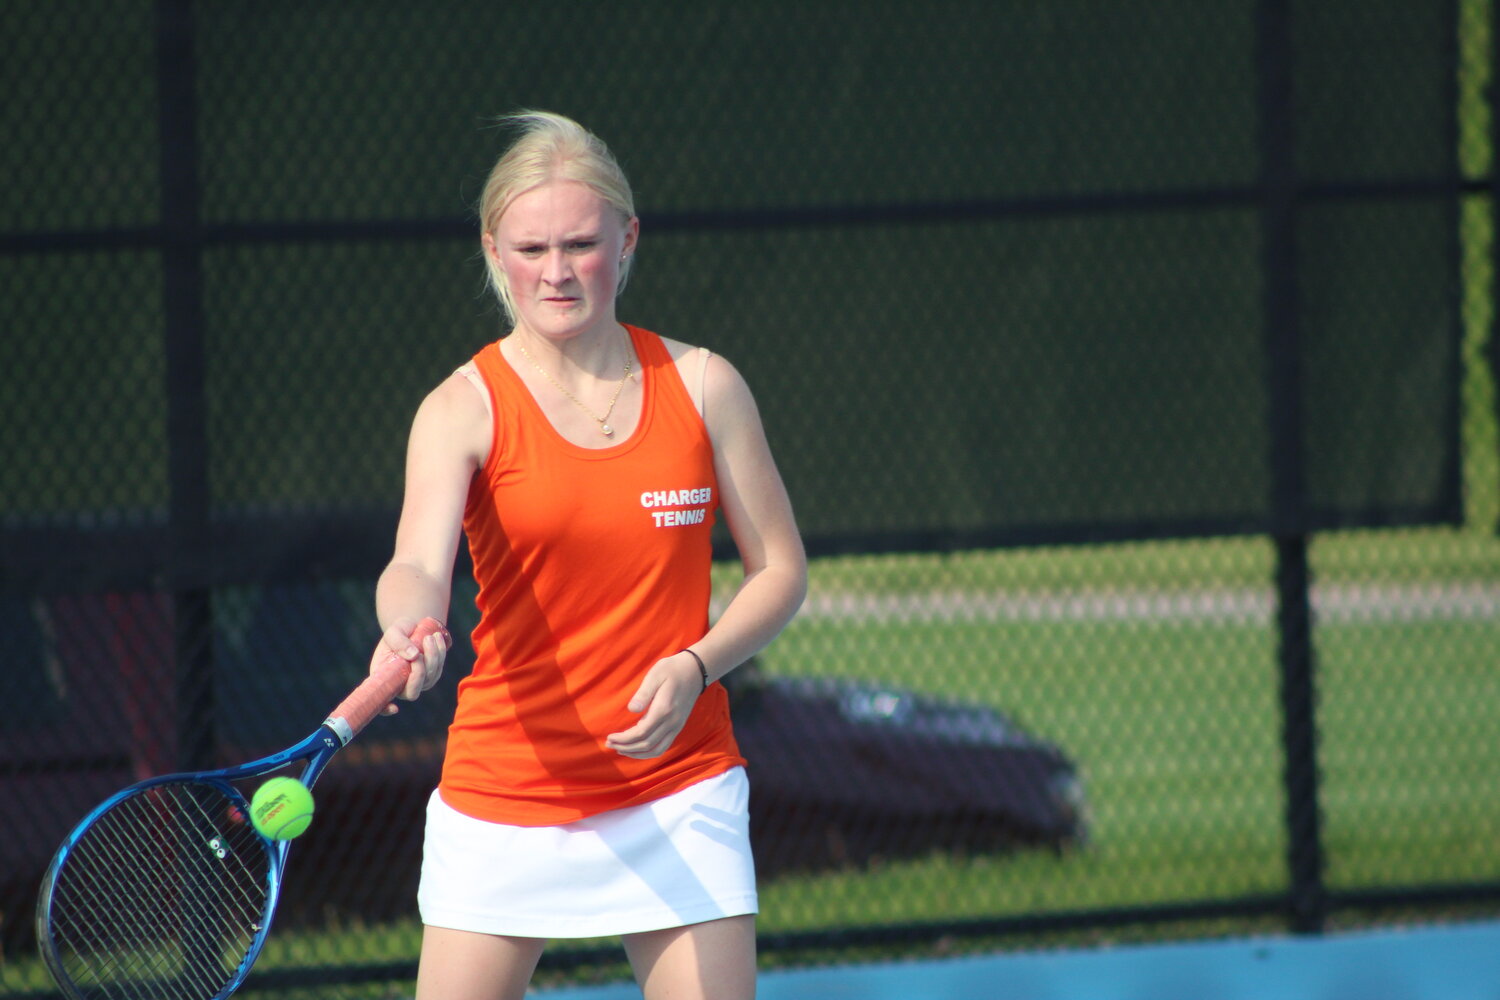 Paige Hudson won her match at one singles.